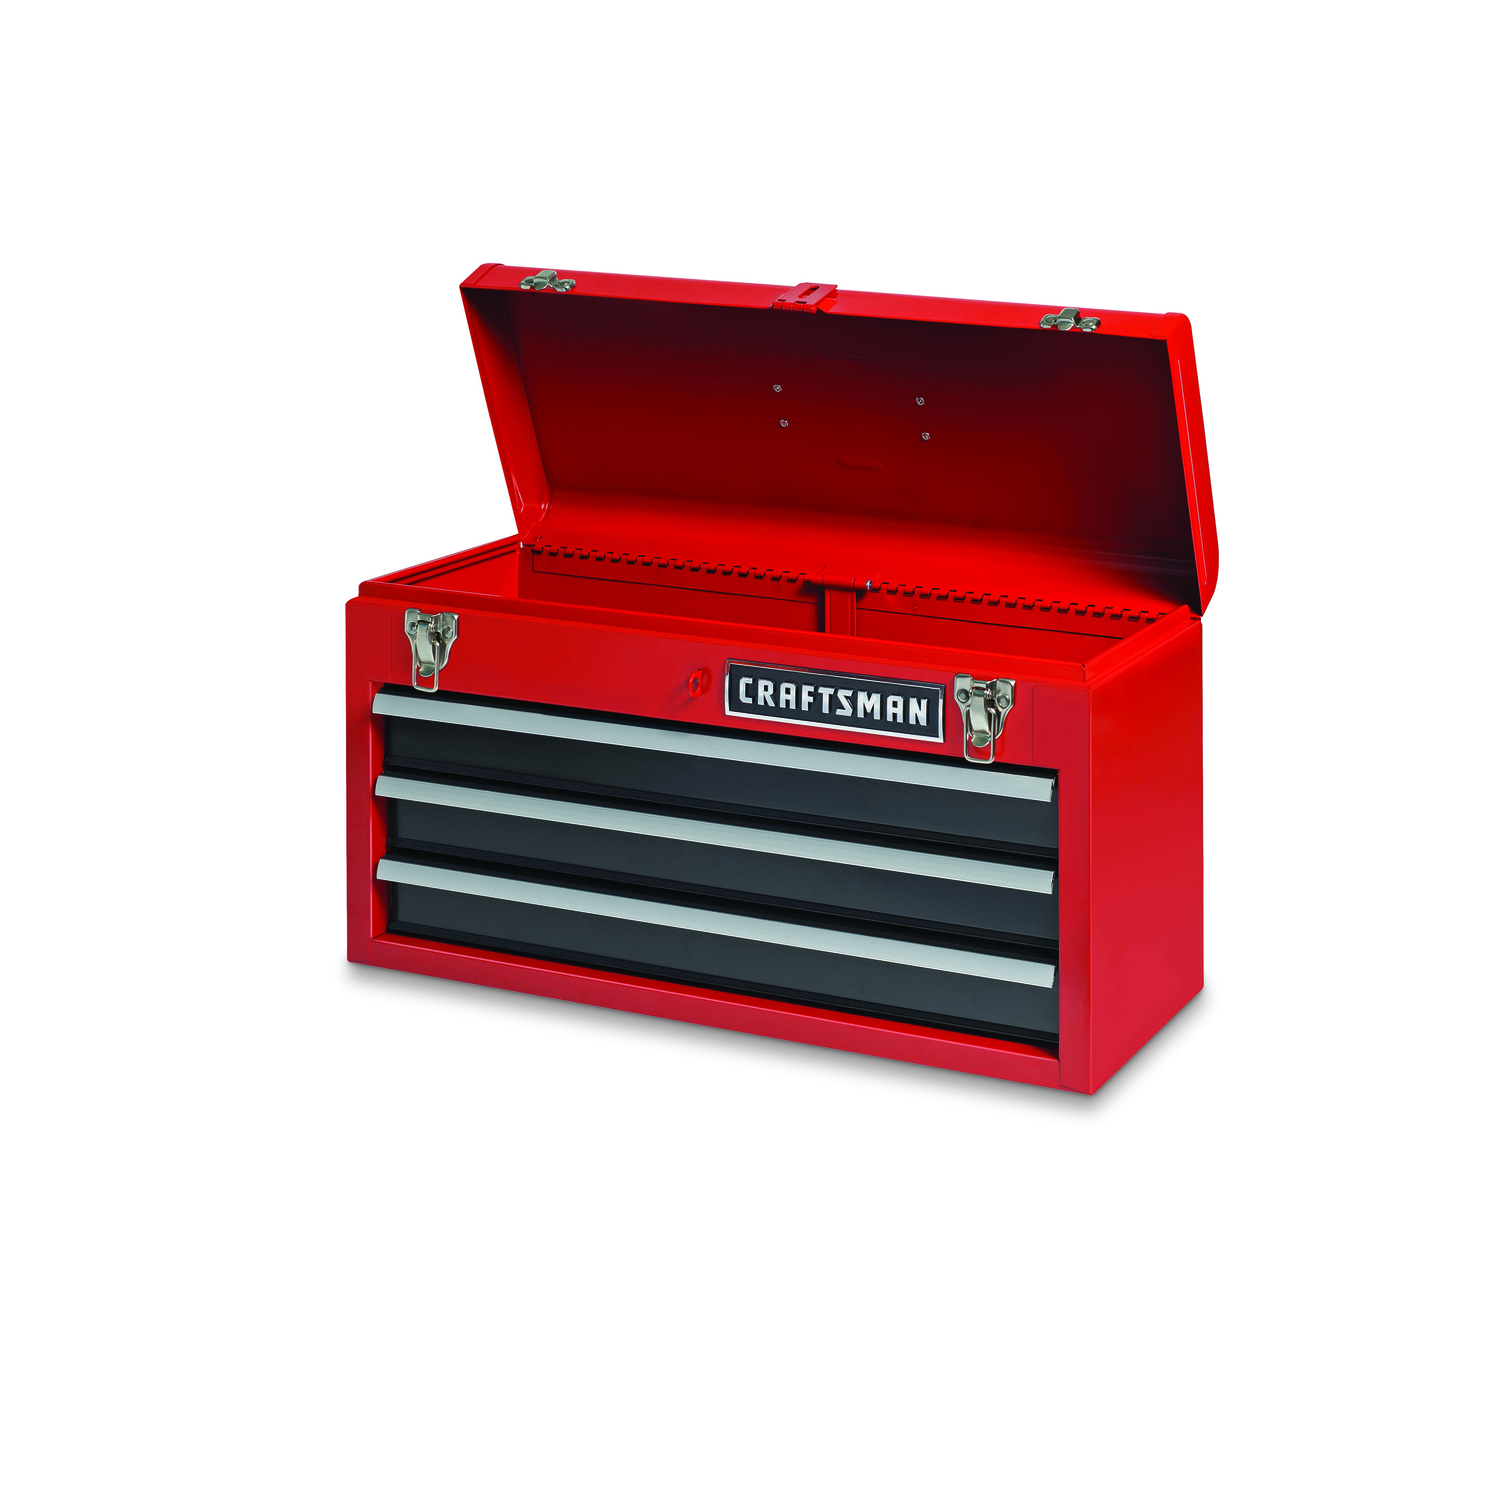 UPC 873388008315 product image for Craftsman 9.3 in. Steel Red and Black Hand Toolbox 20.6 in. W x 12.9 in. H Red | upcitemdb.com